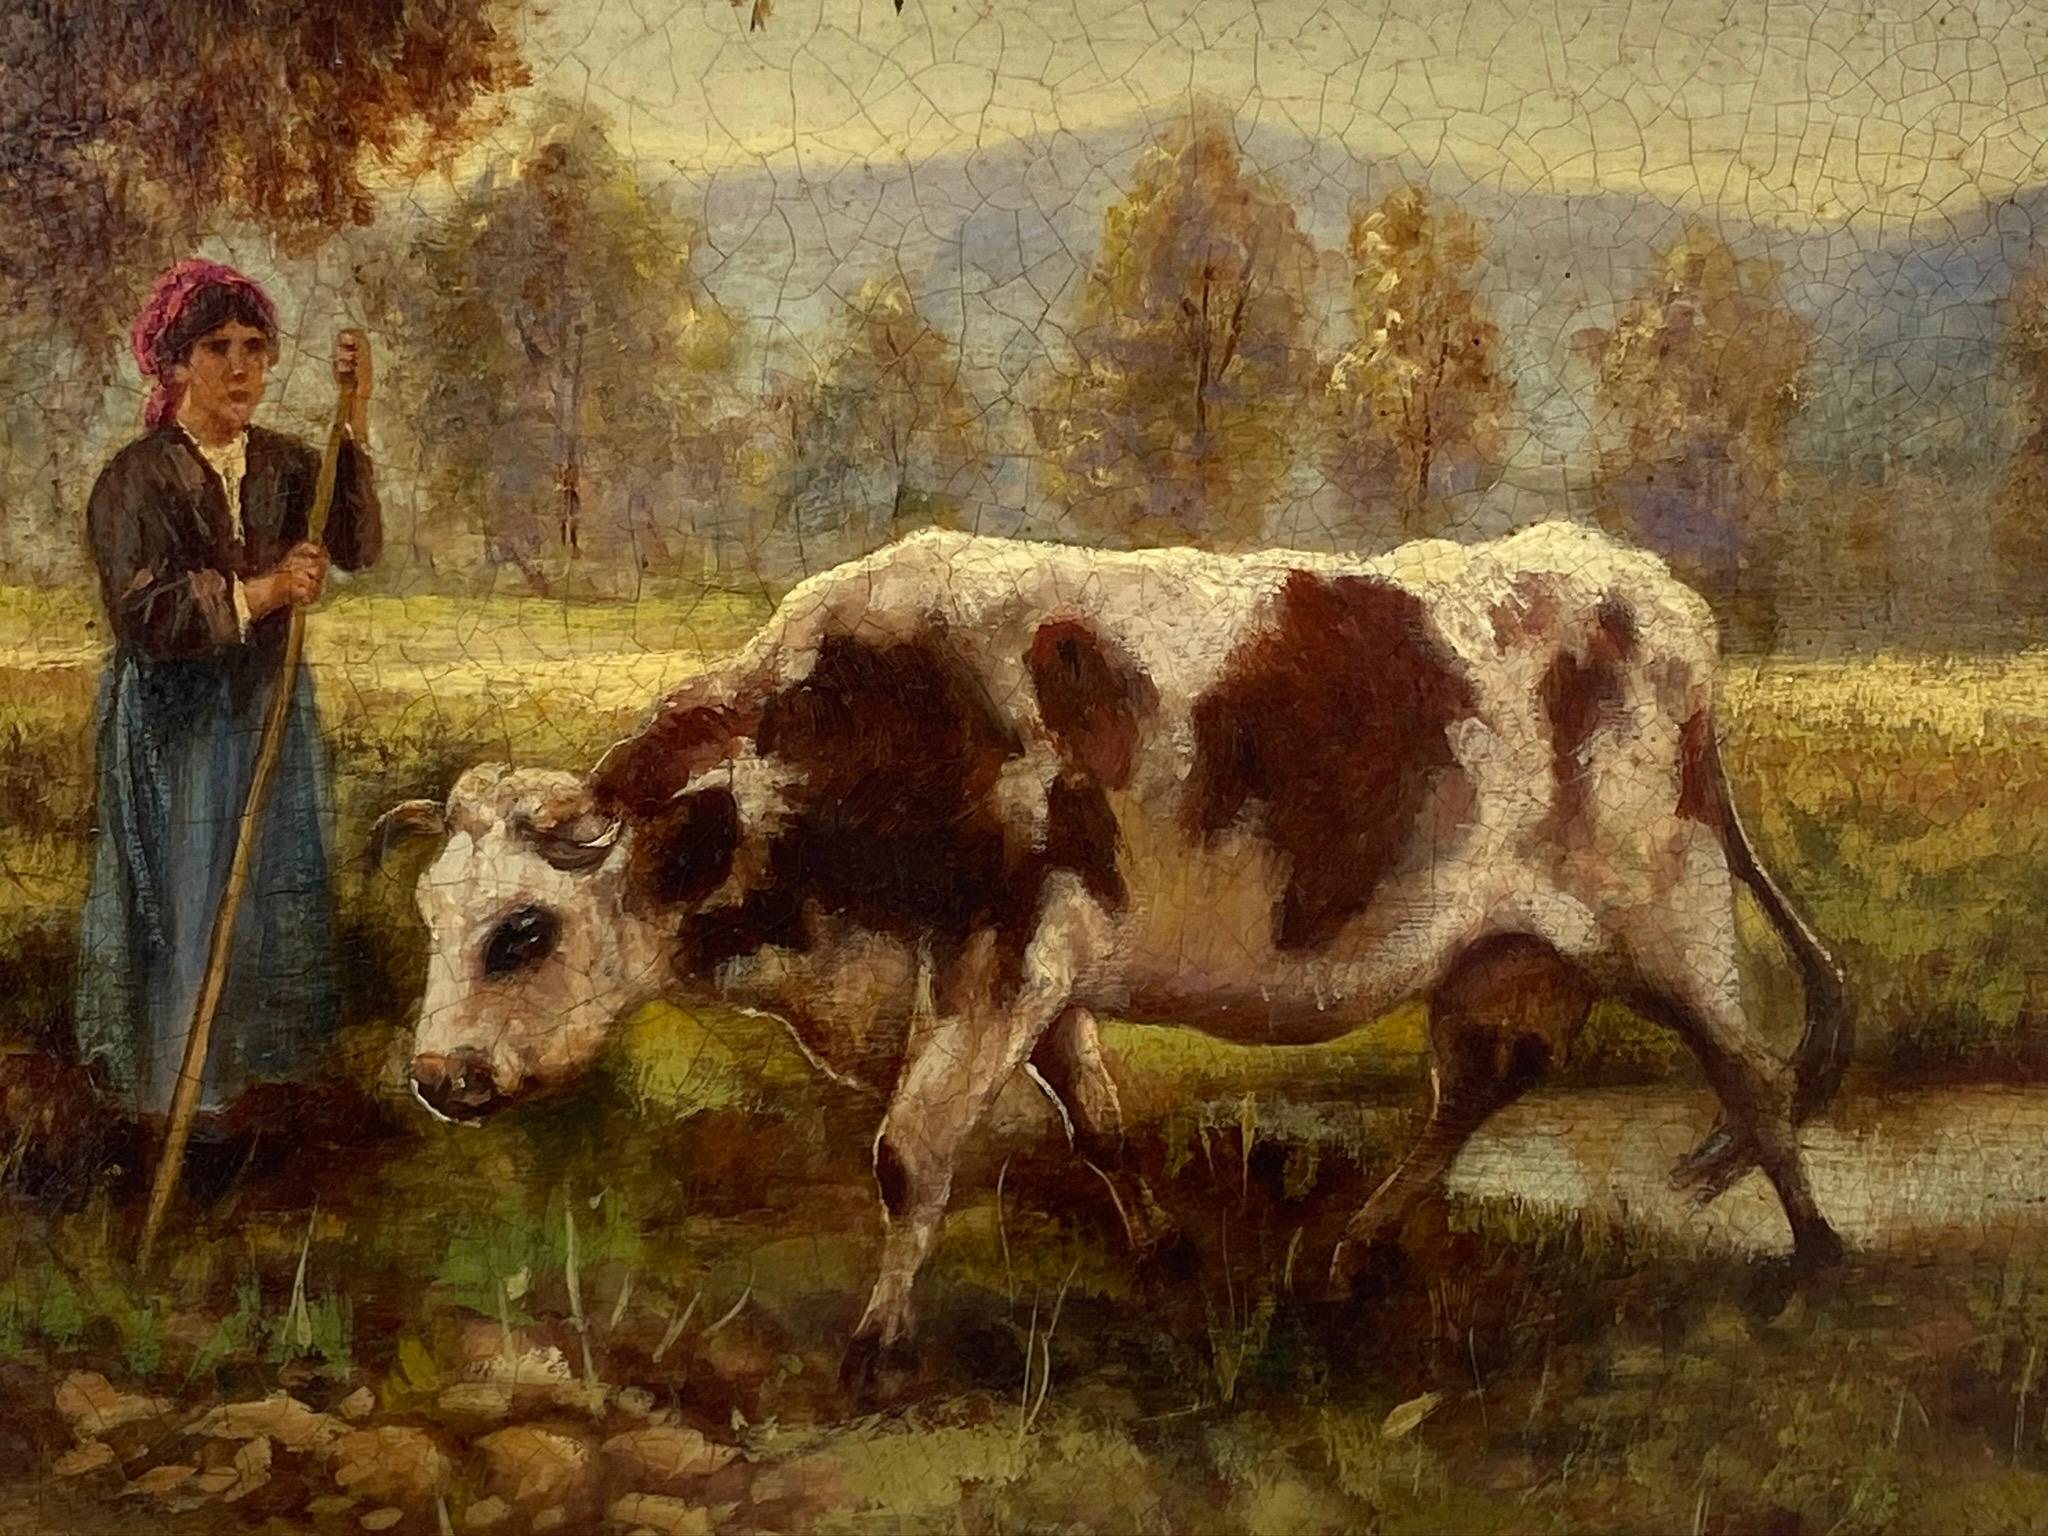 THE SHEPERDESS OF COWS - In the Manner of Julien Dupre'- Oil on Canvas Painting - Black Landscape Painting by Ciro De Rosa